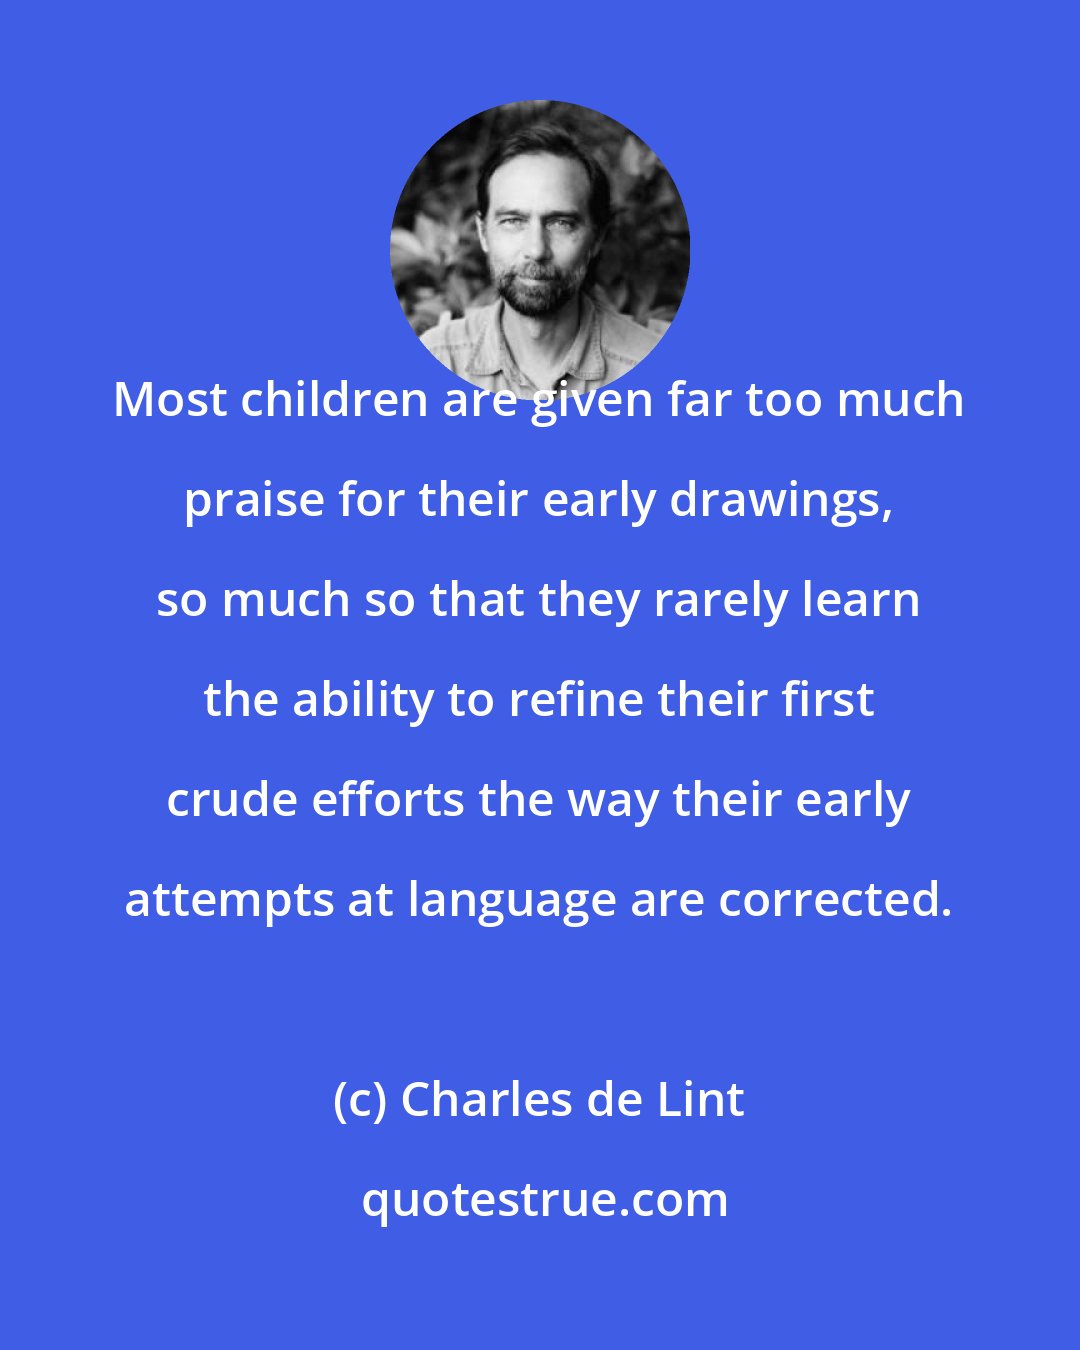 Charles de Lint: Most children are given far too much praise for their early drawings, so much so that they rarely learn the ability to refine their first crude efforts the way their early attempts at language are corrected.